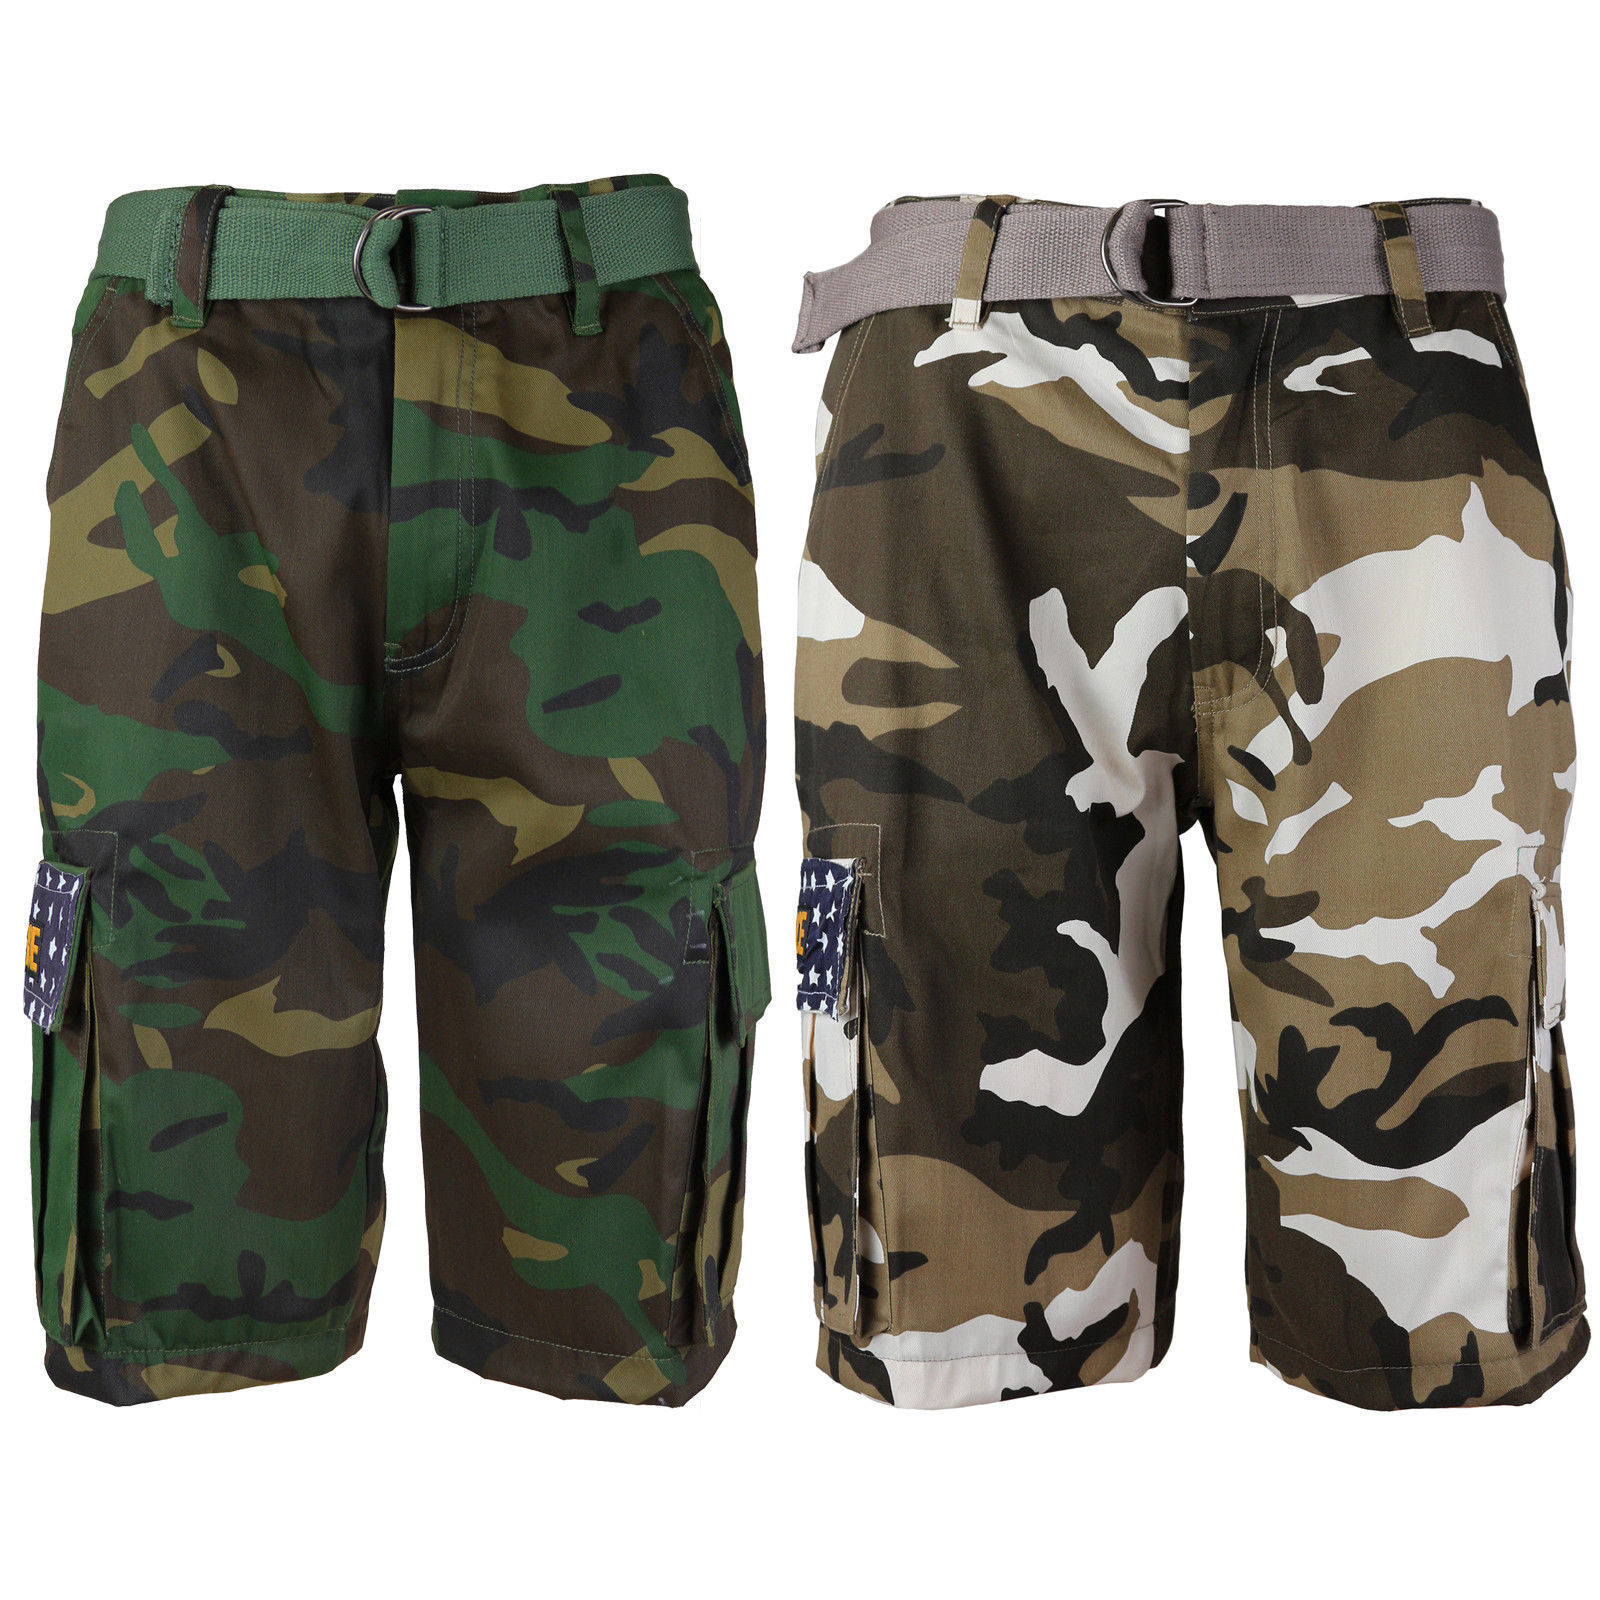 SW Men/'s US Force Military Army Multi Pocket Camouflage Cargo Shorts with Belt